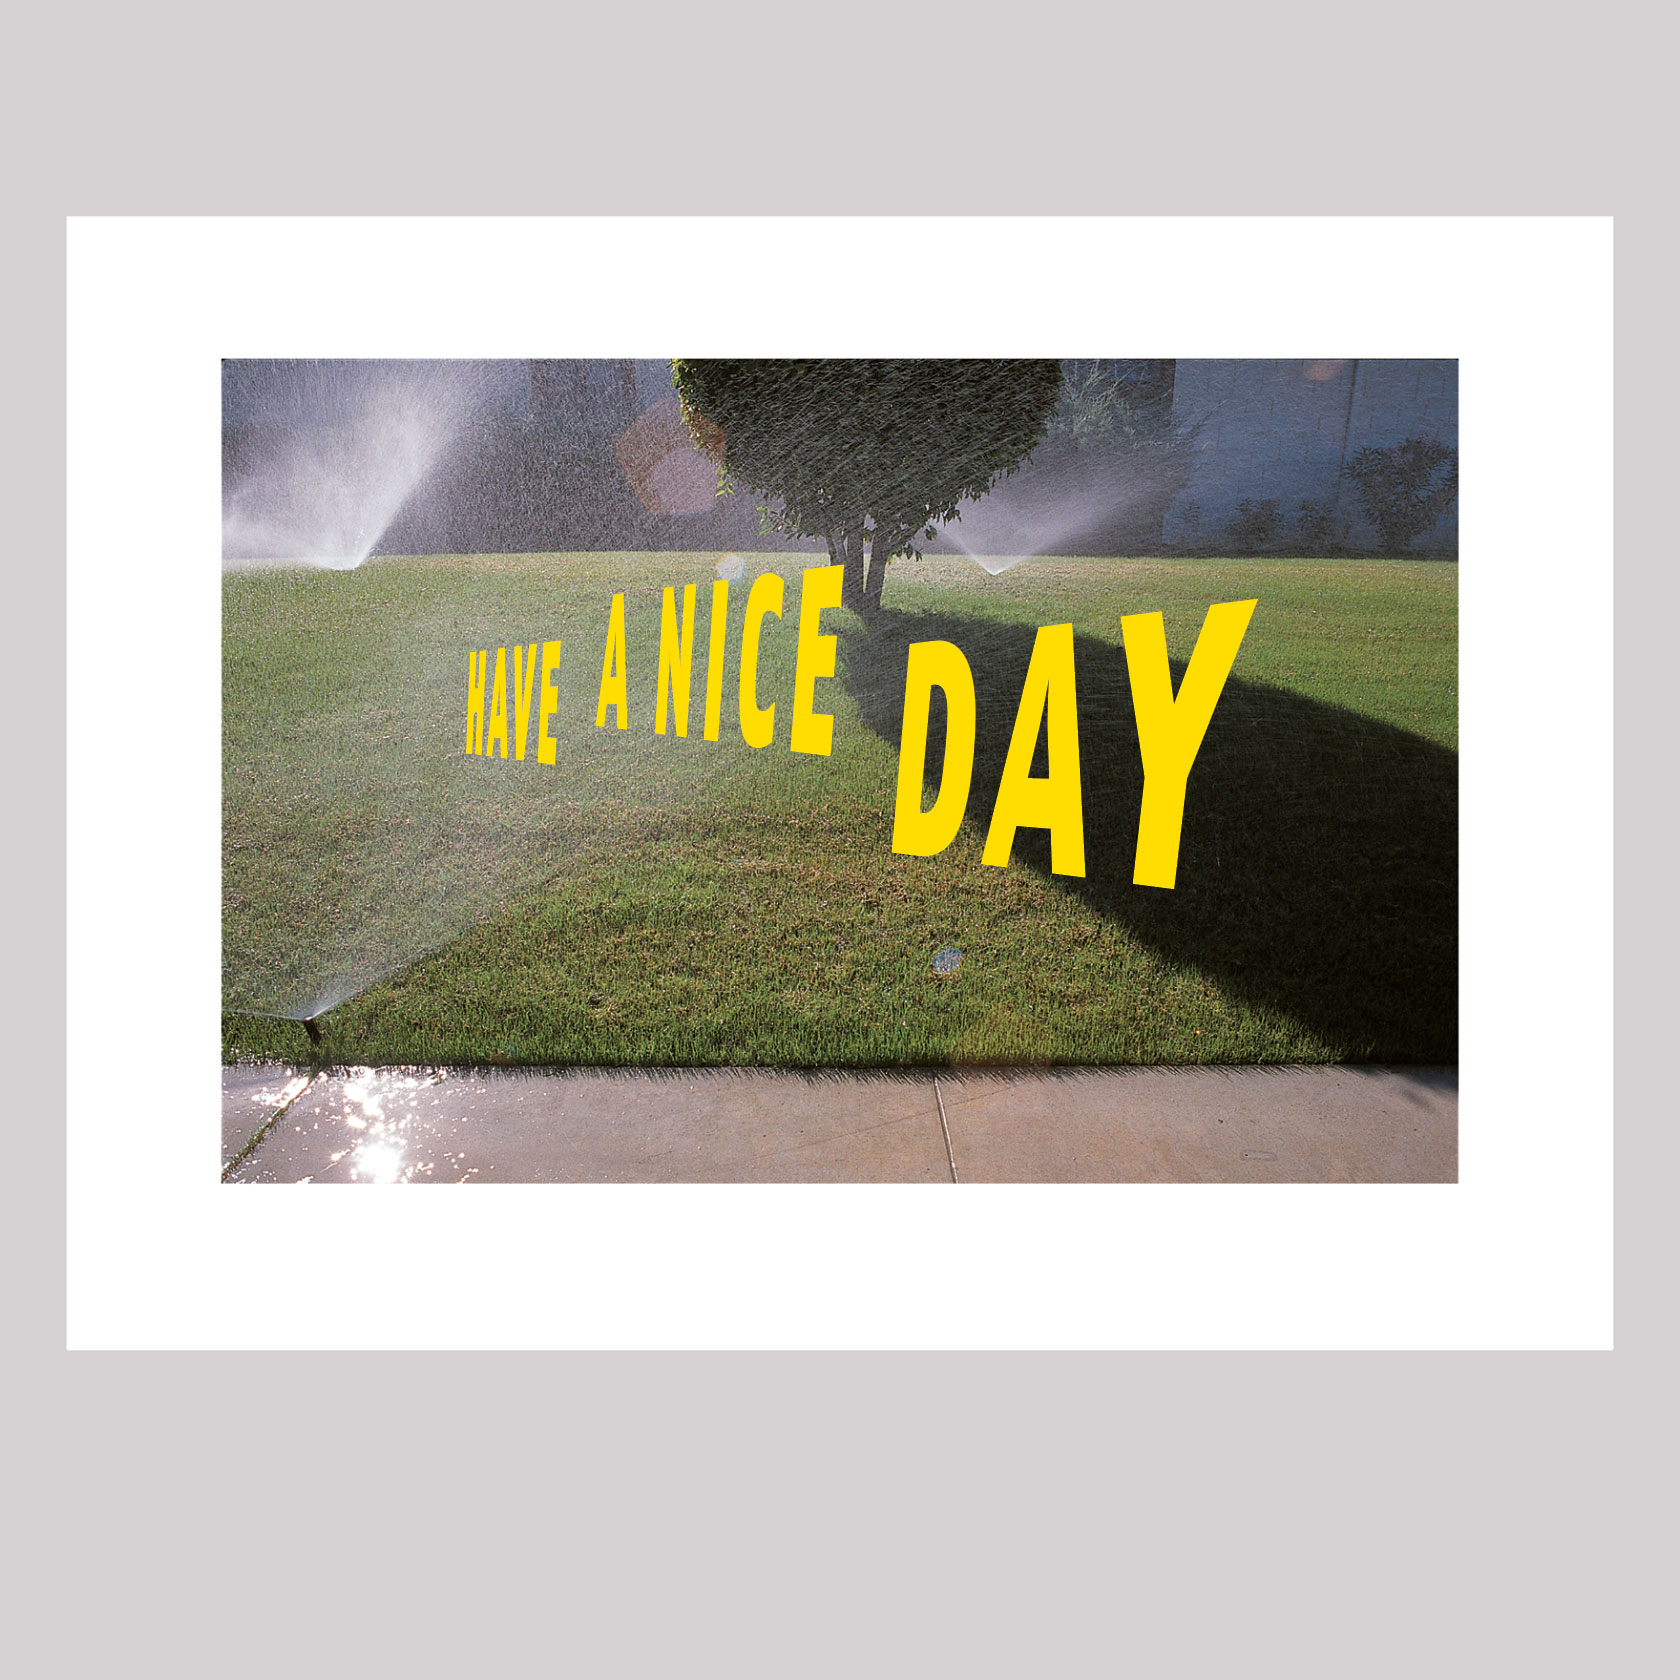 Have a Nice Day (Digital Print)